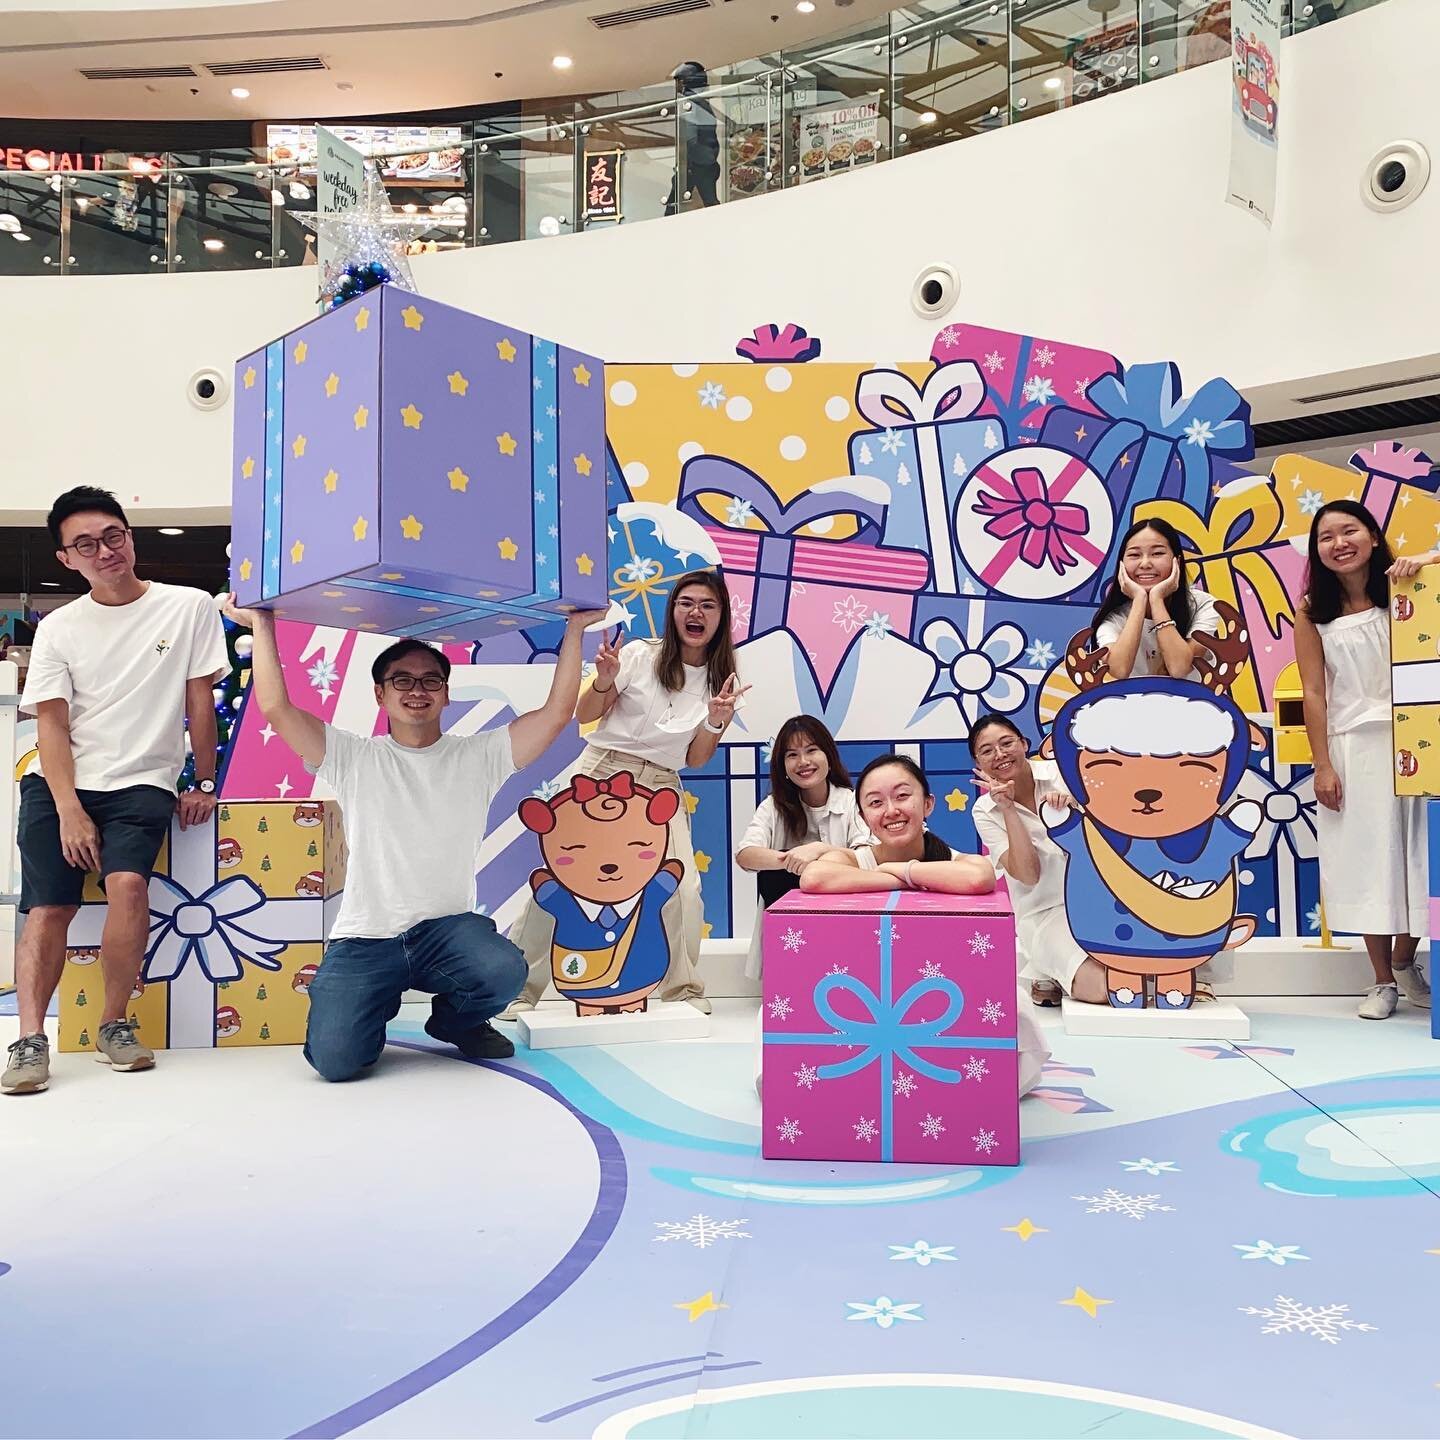 MERRY CHRISTMAS! 🎄❄️✨
We are so excited to be able to bring #otahandfriends to Kallang Wave Mall to spread festive cheer this Christmas. It is a Winter Lodge where we imagine a snowy playground filled with fun Christmas photo opportunities and activ